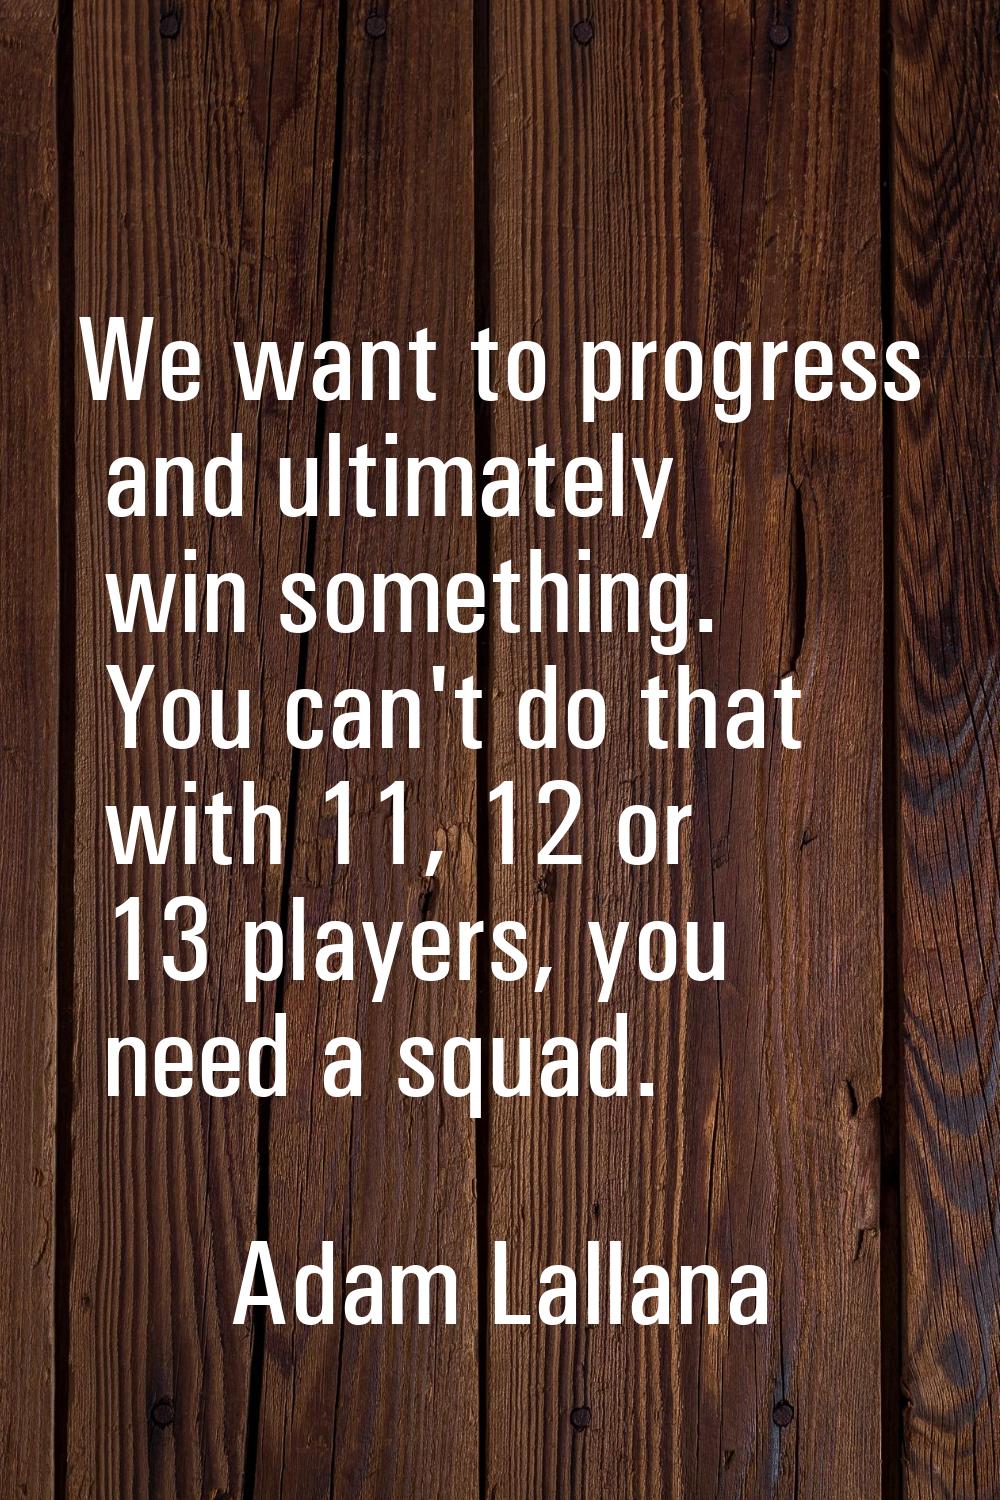 We want to progress and ultimately win something. You can't do that with 11, 12 or 13 players, you 